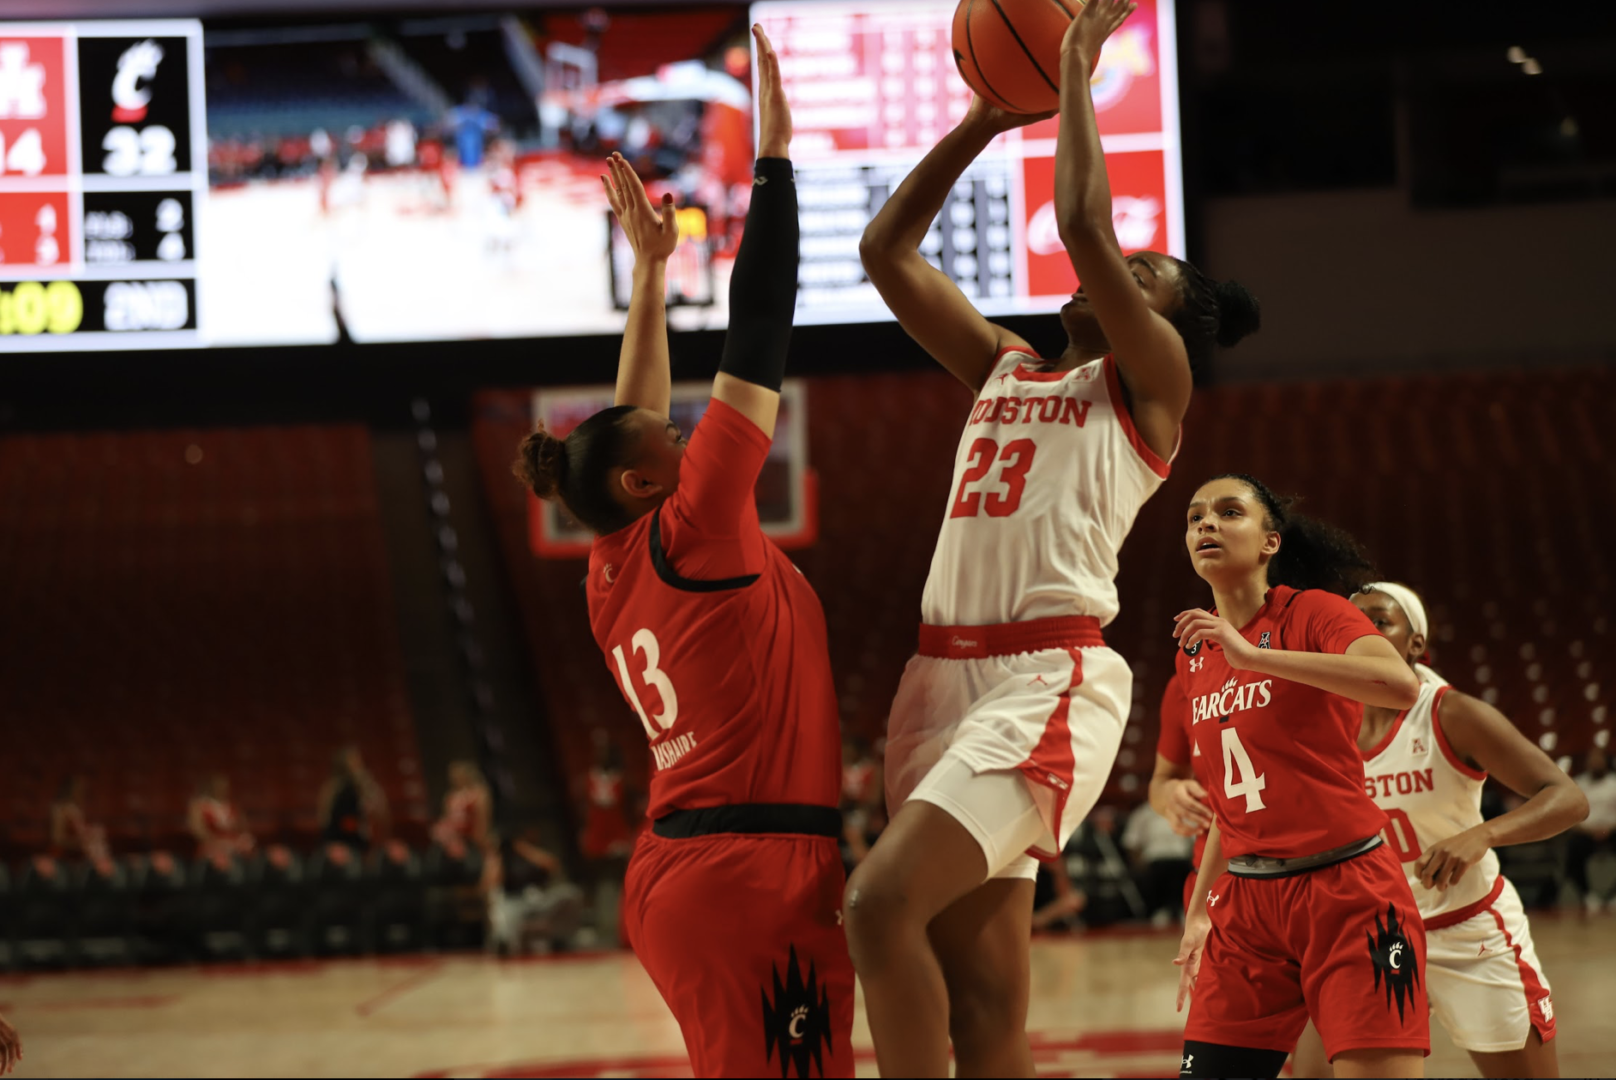 The UH women's basketball team dropped its fourth consecutive game on Wednesday. | Atirikta Kumar/The Cougar